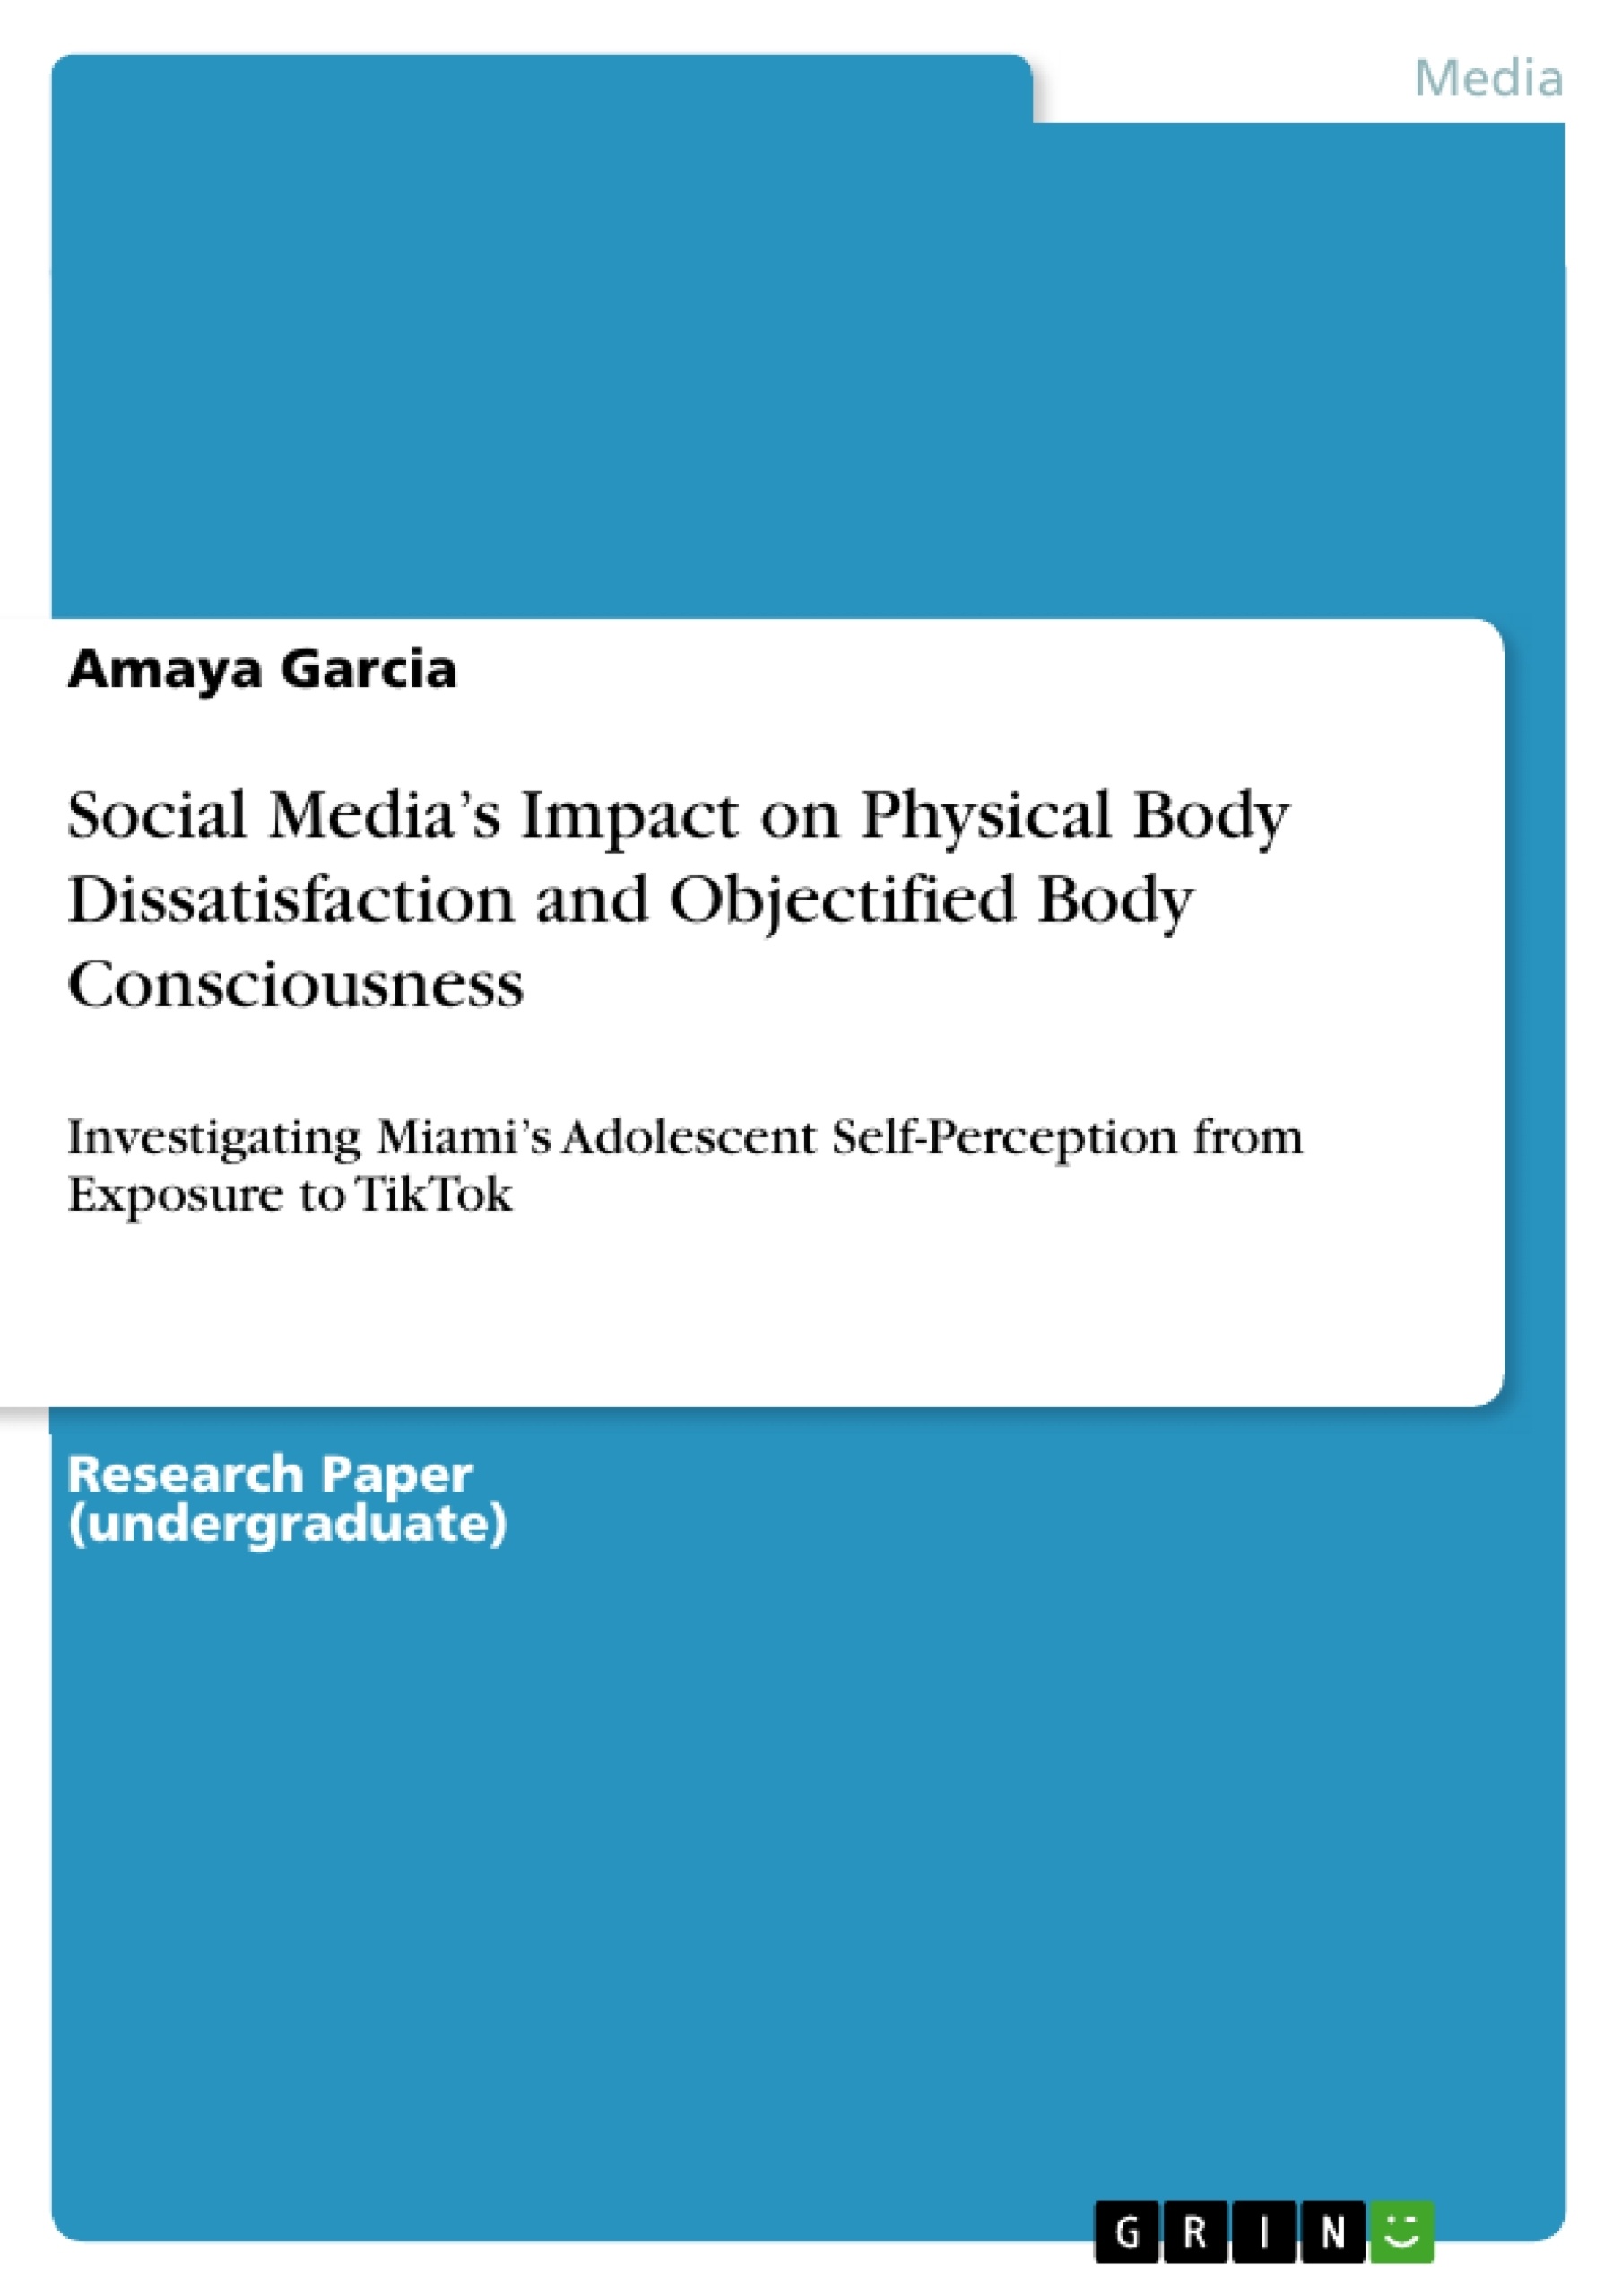 Título: Social Media’s Impact on Physical Body Dissatisfaction and Objectified Body Consciousness